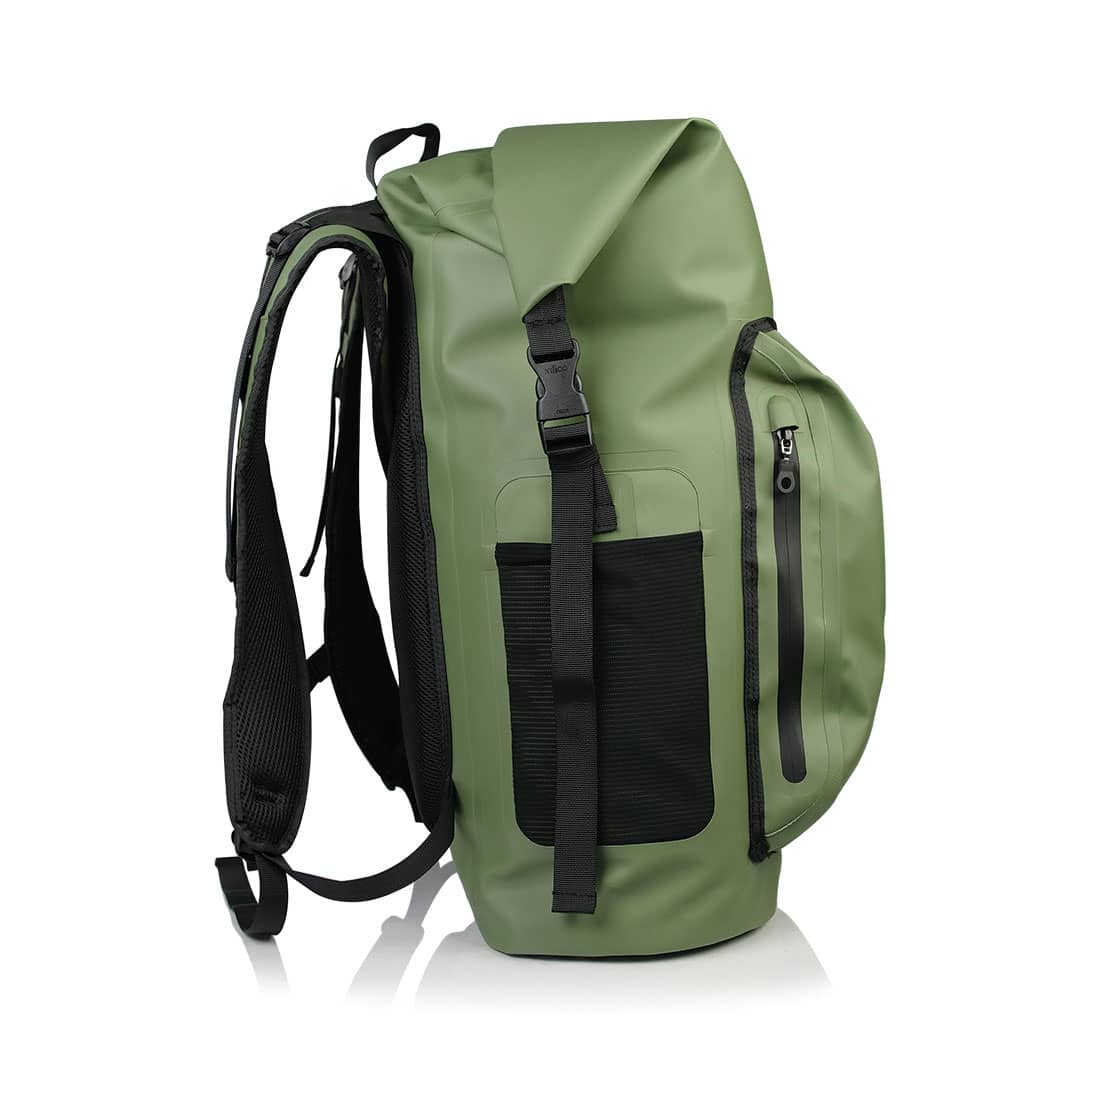 RYOT SmellProof DRY+ Backpack | Bags & Cases | 420 Science